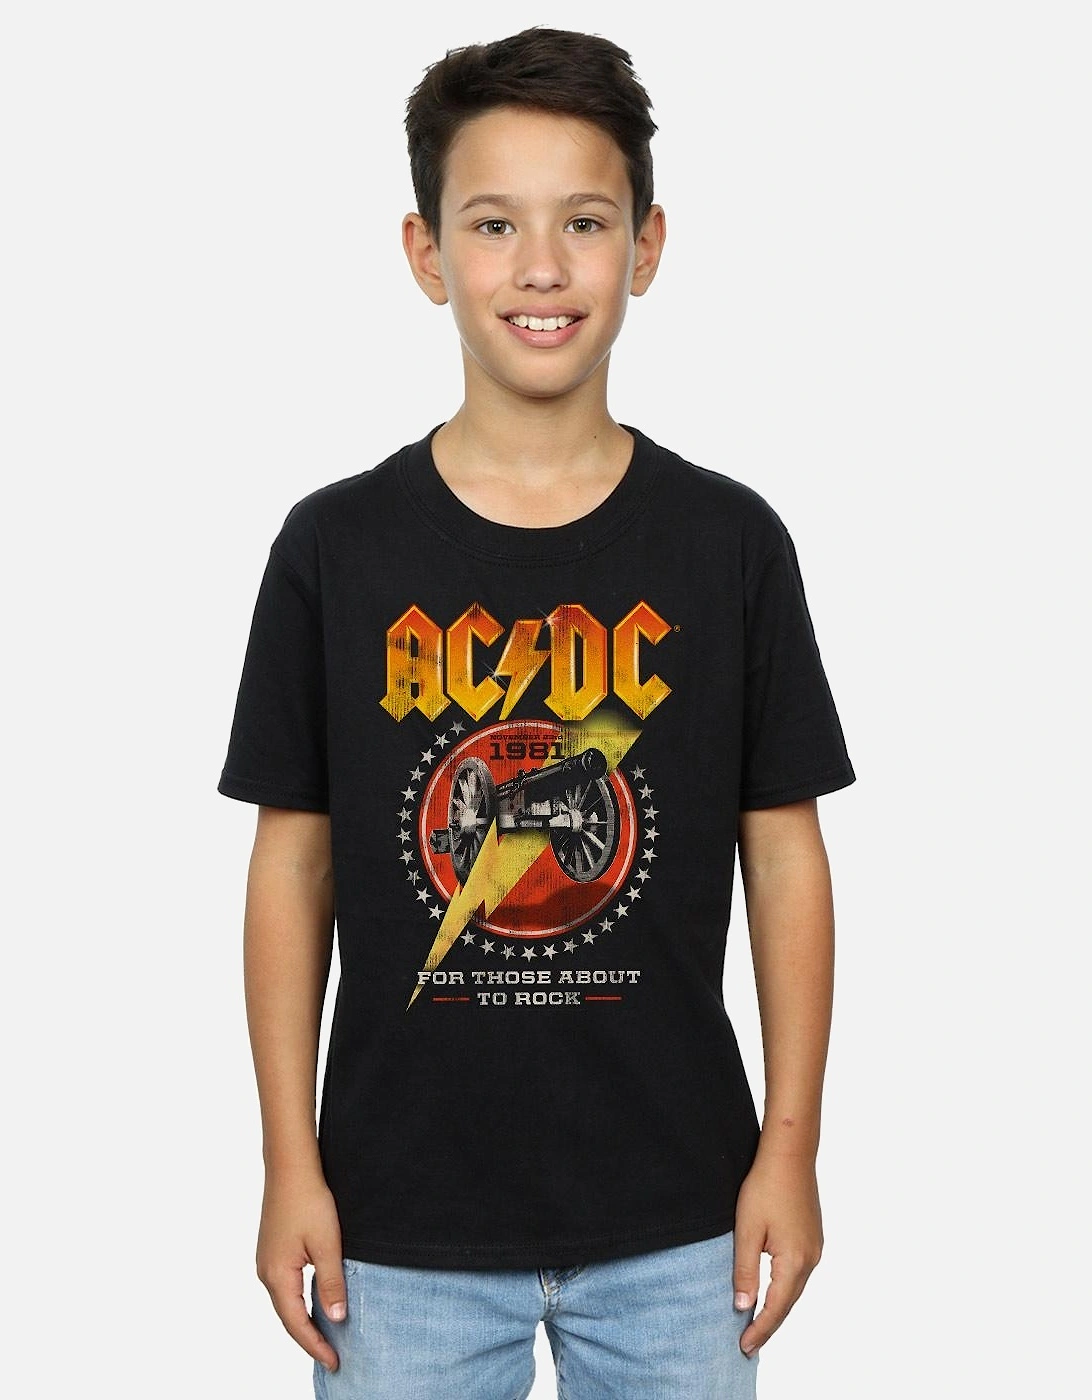 Boys For Those About To Rock 1981 T-Shirt